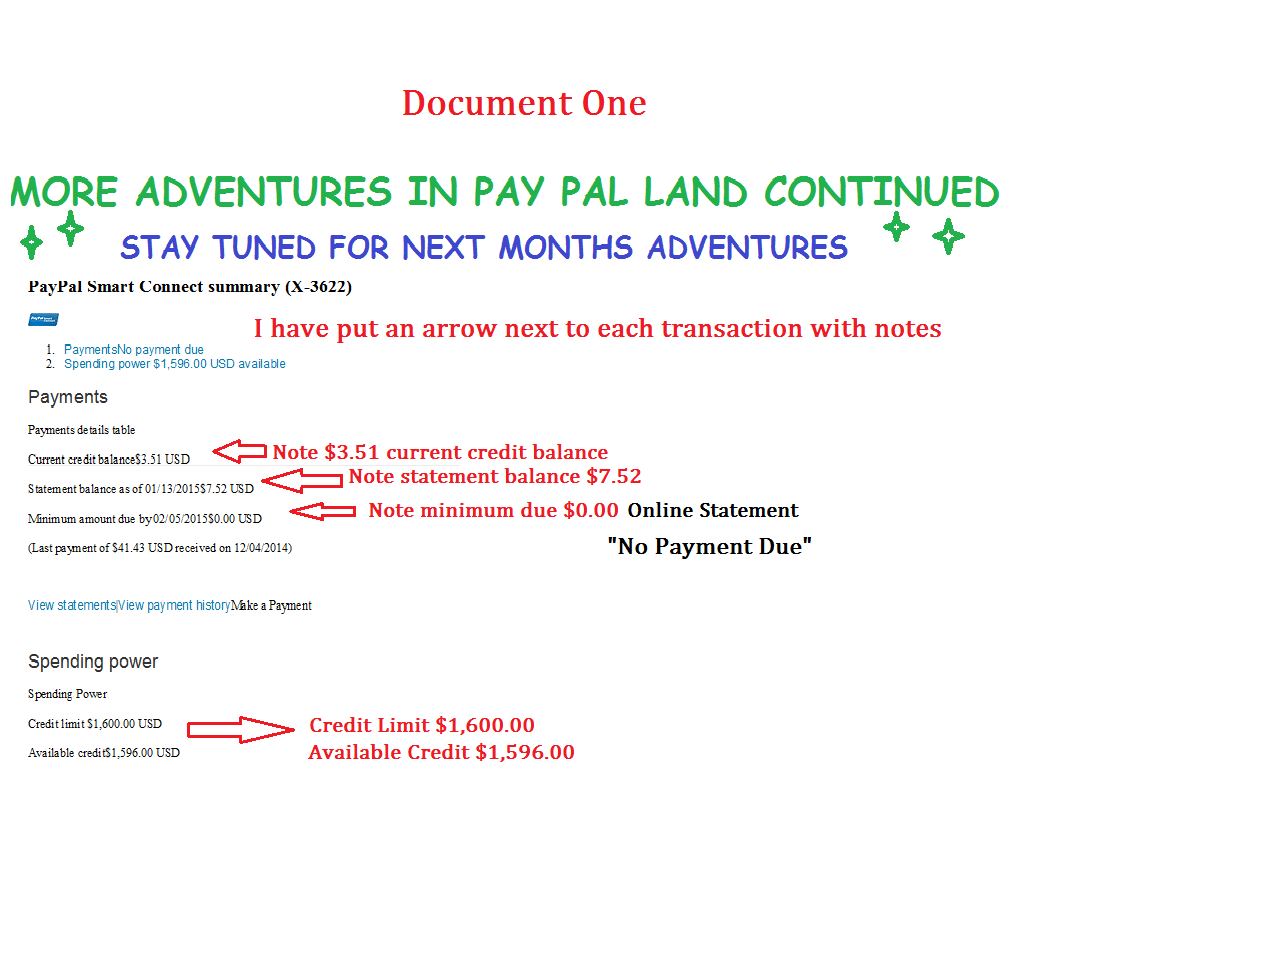 This is document two more "Adventures in Pay Pal Land" continued 